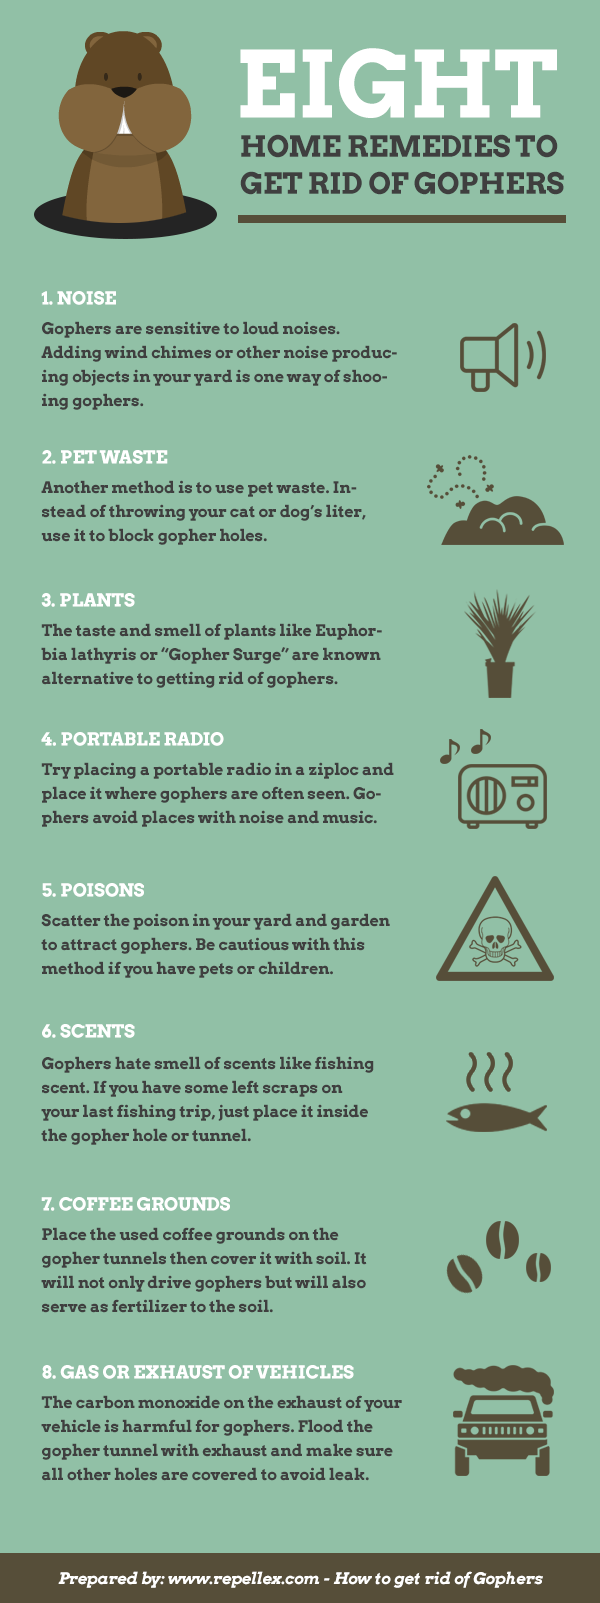 effective methods getting rid of moles or gophers at home